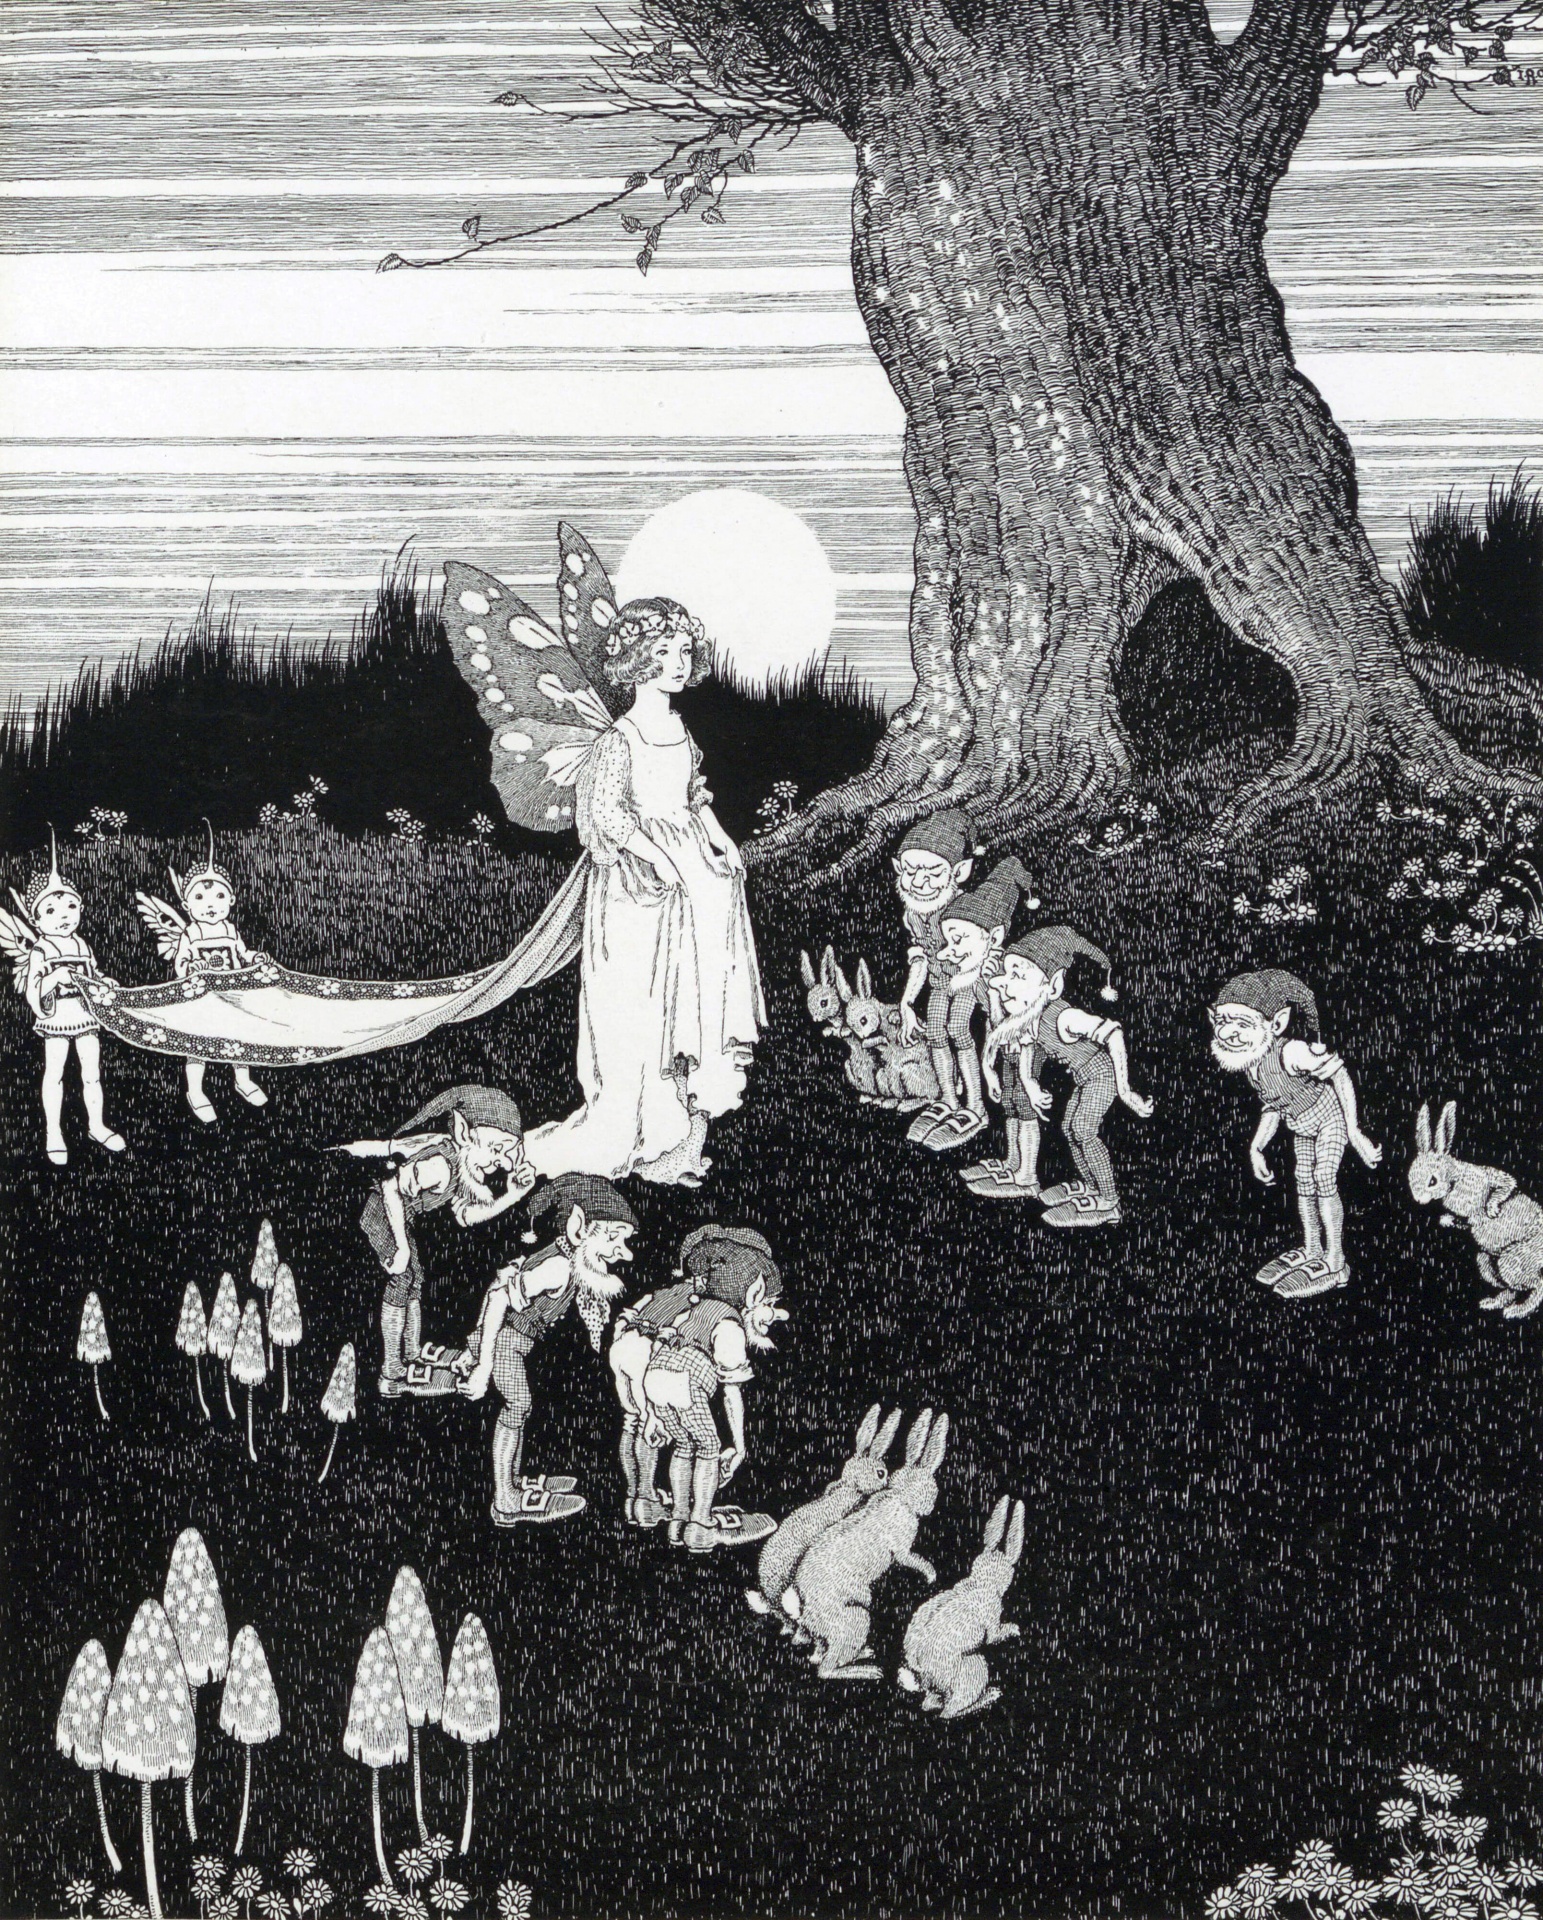 Vintage black and white art illustration of a fairy bridesmaid in fairyland with goblins, gnomes and mushrooms childrens story book by artist Ida Rentoul Outhwaite